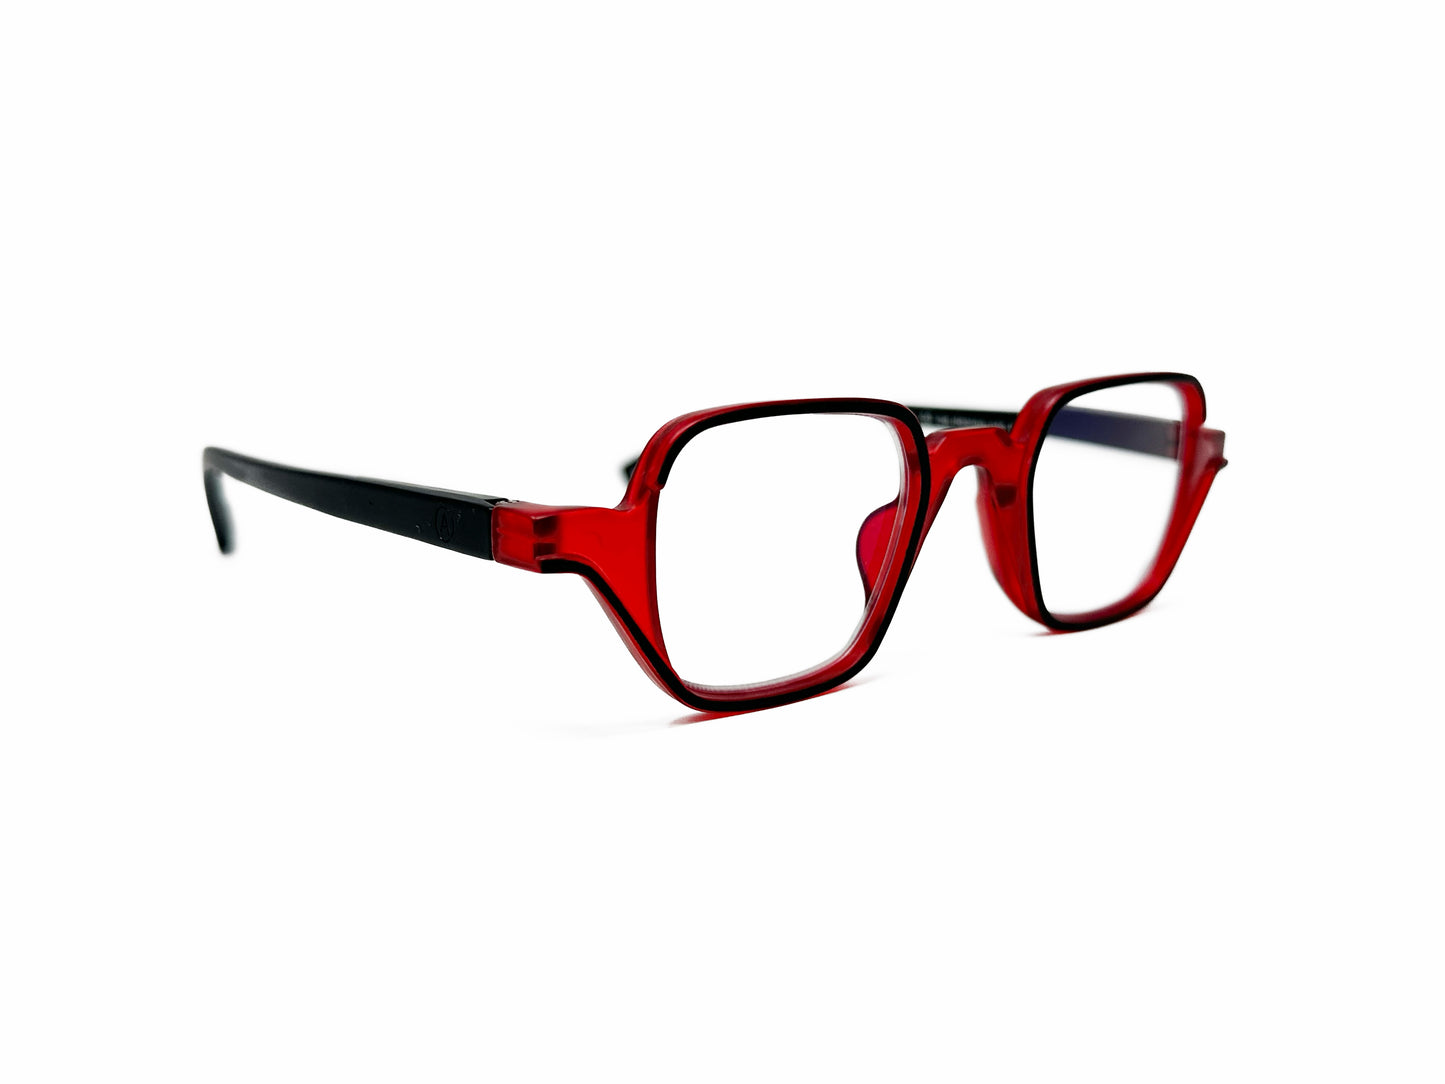 Aptica square acetate reader. Model: Lector. Color: Royal Red. Side view.